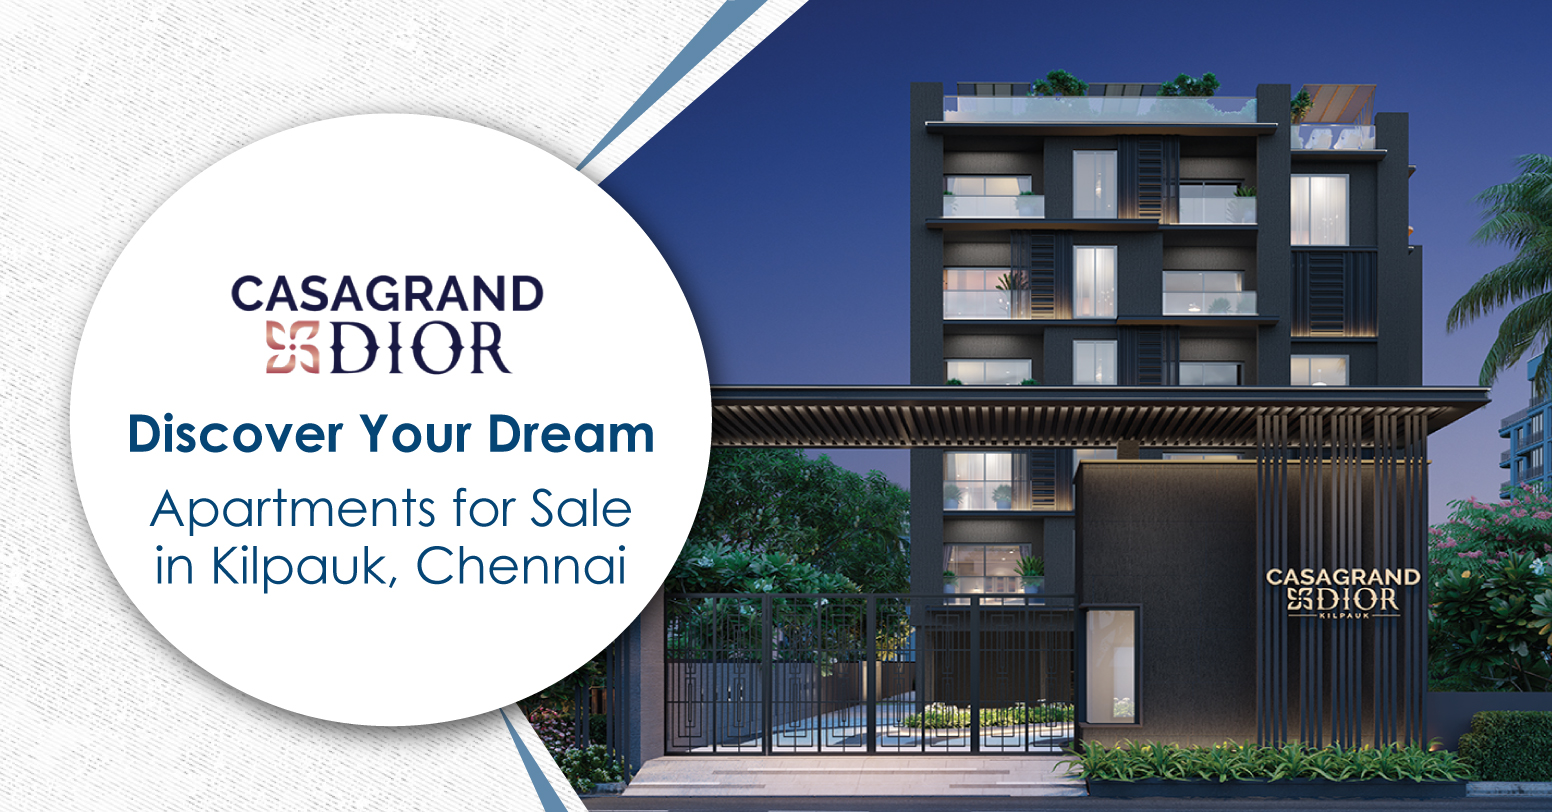 Casagrand Dior: Discover Your Dream Apartments for Sale in Kilpauk, Chennai